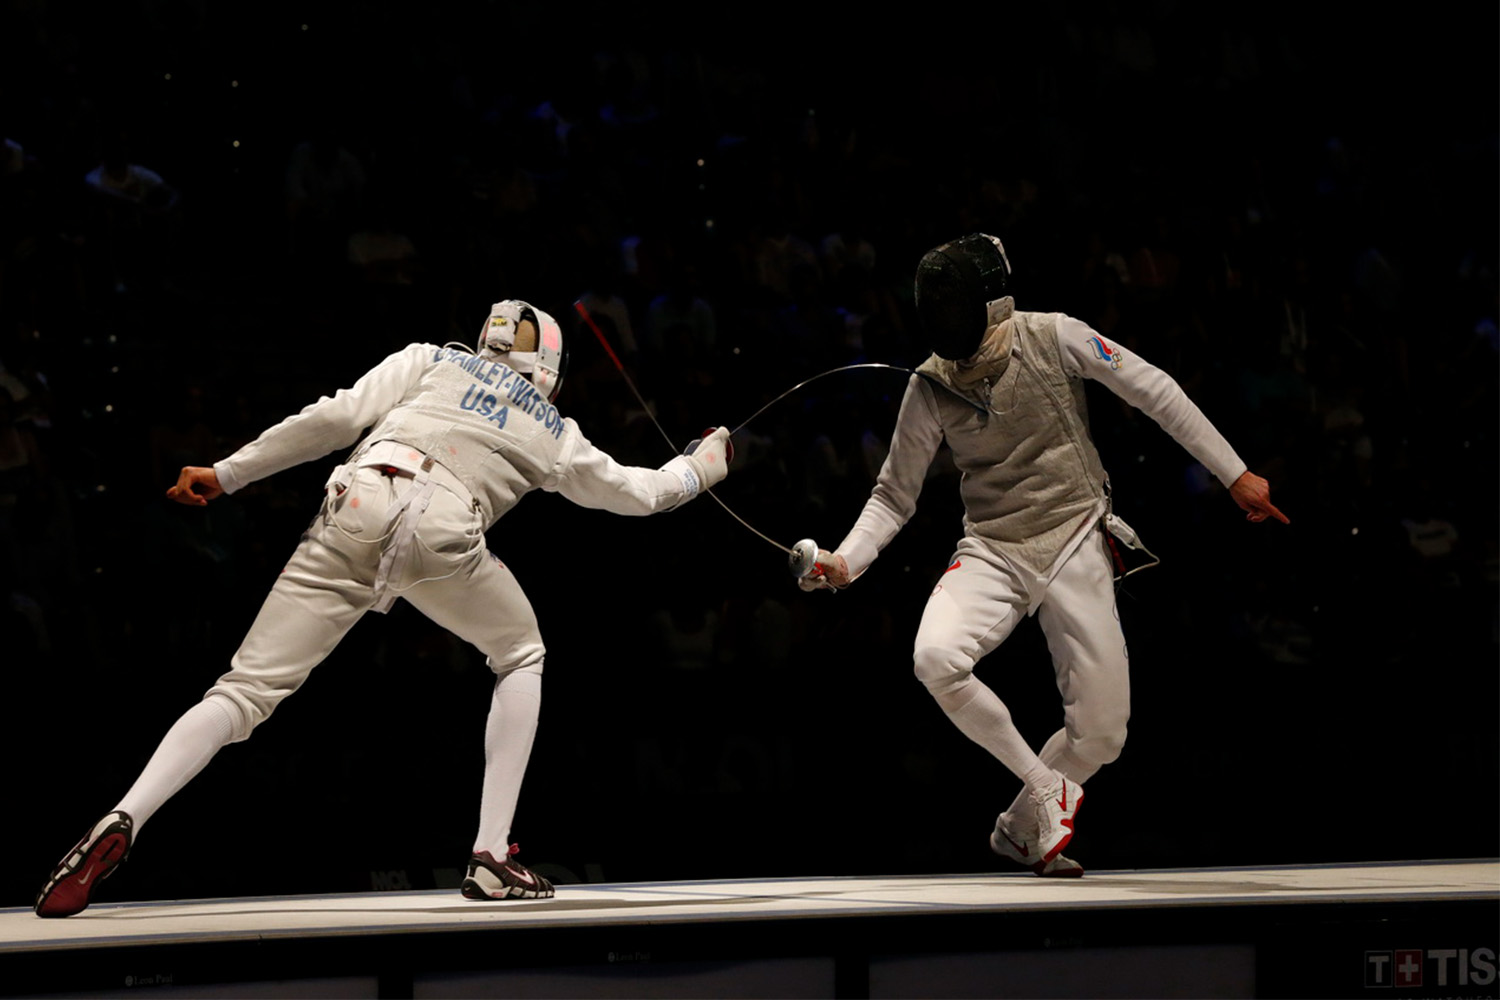 Miles Chamley-Watson fencing against an opponent.